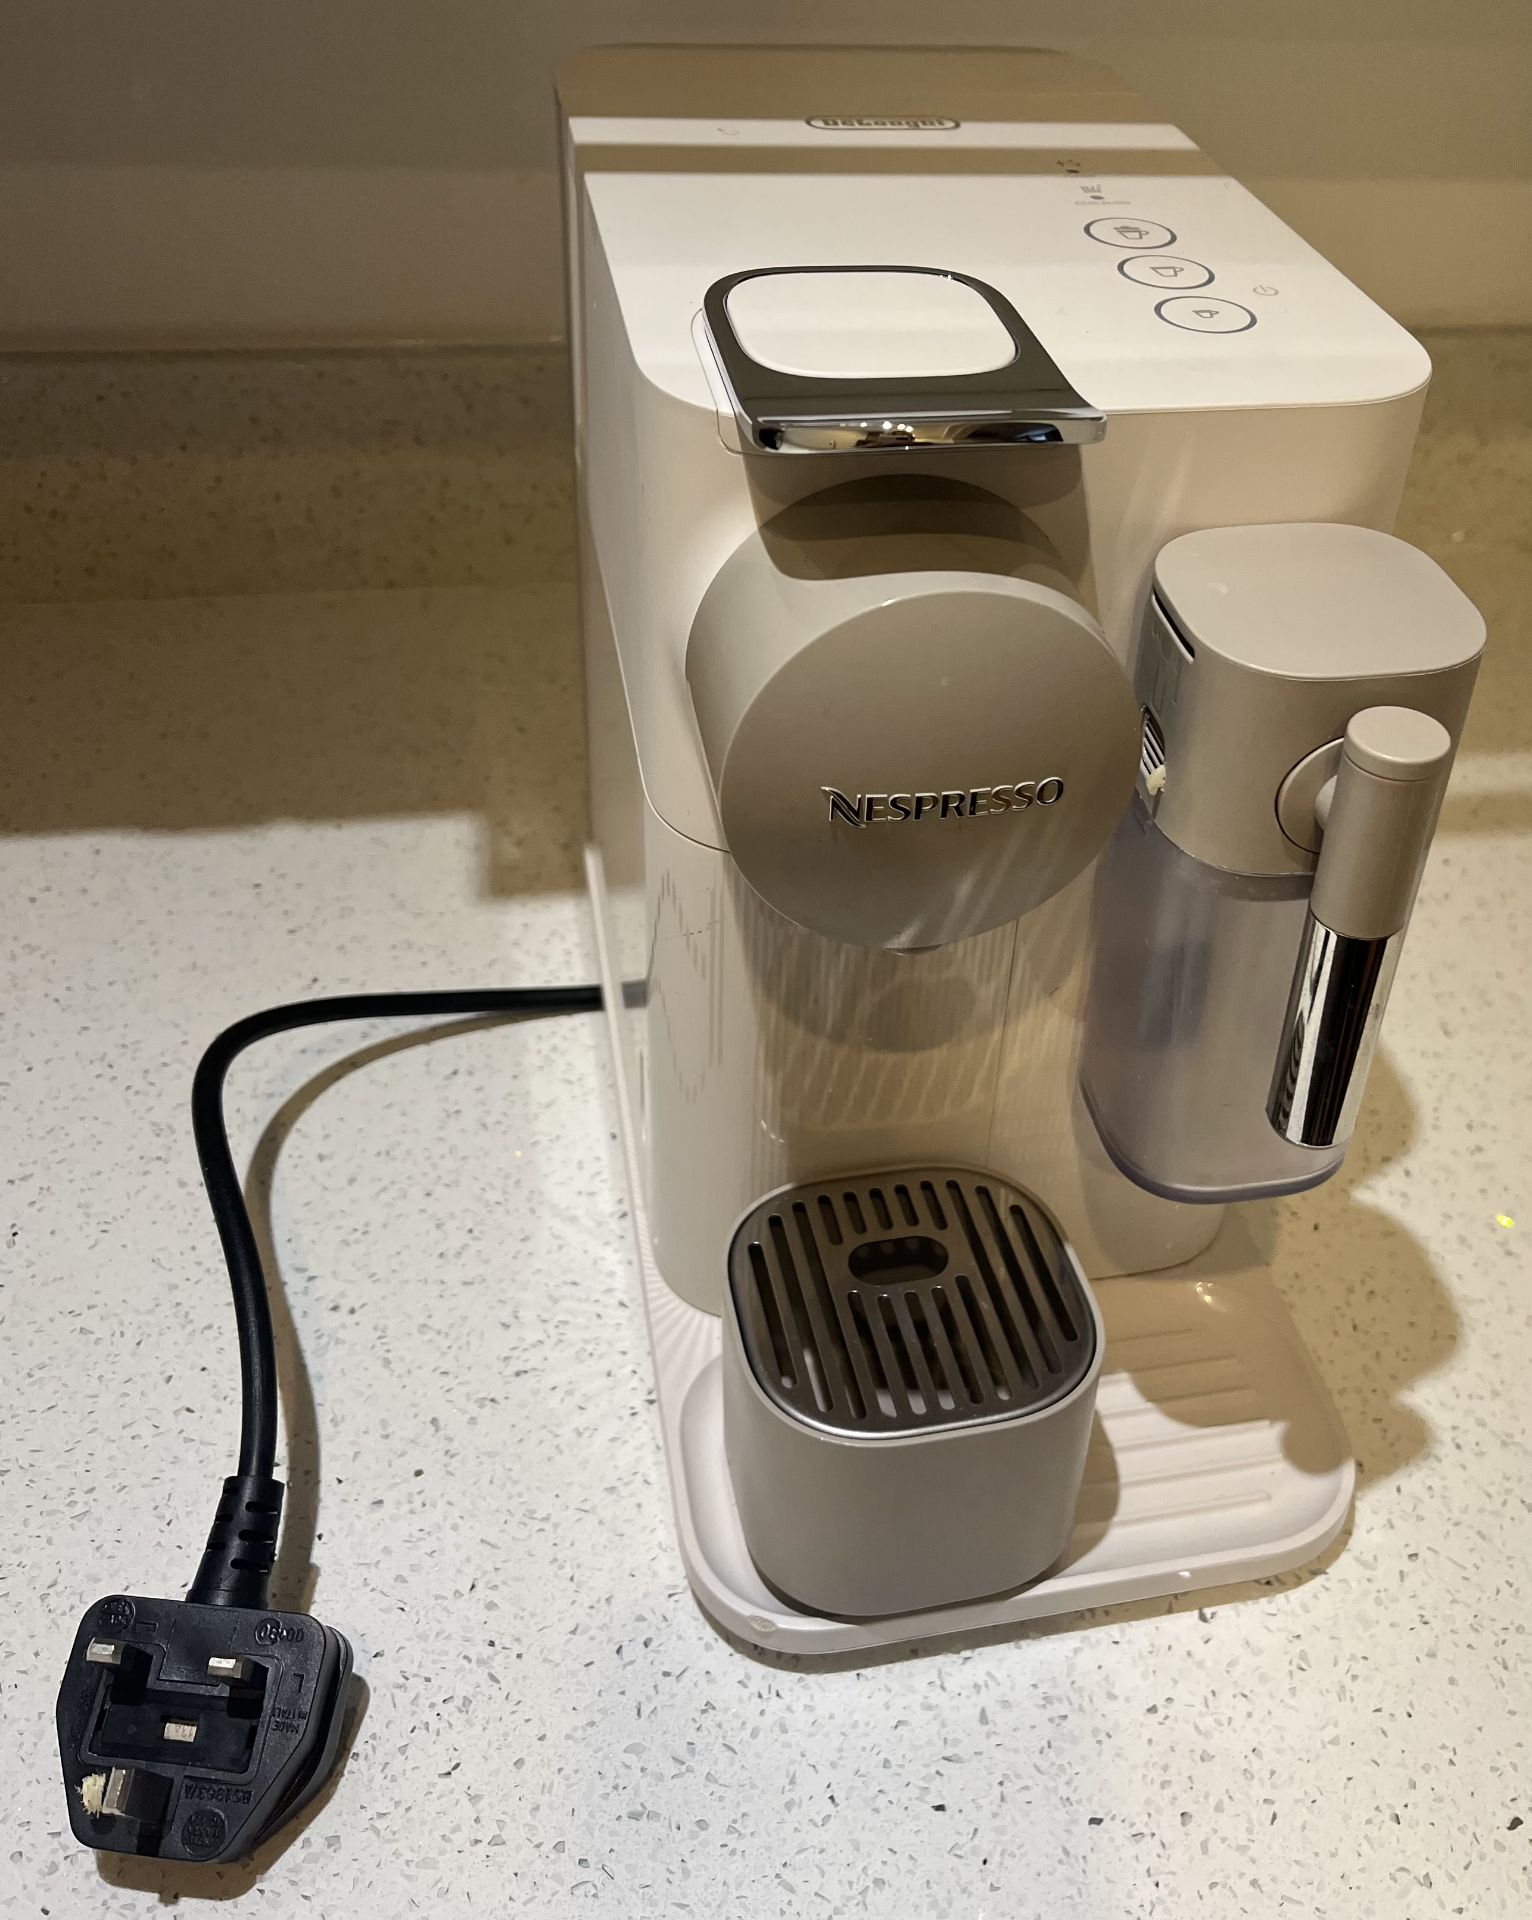 Nespresso Coffee Maker by Deâ€™Longhi -  Excellent Condition - New RRP Â£259.99 - Image 2 of 6